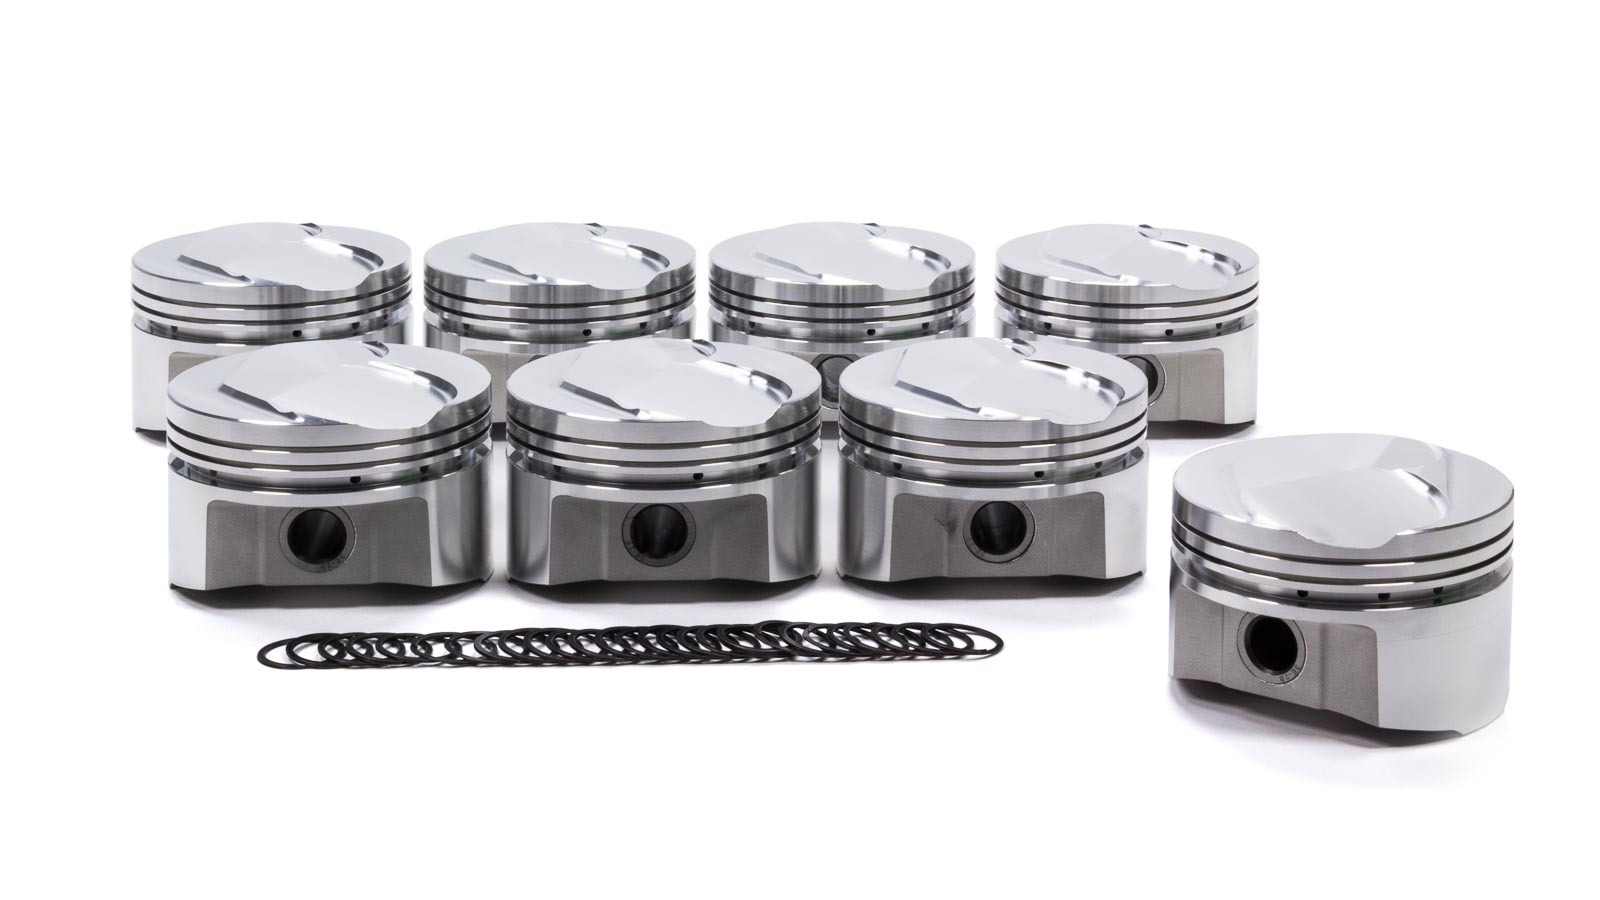 SRP Pistons 289555 Piston, Boss 302 Dome, Forged, 4.030 in Bore, 1/16 x 1/16 x 3/16 in Ring Grooves, Plus 3.50 cc, Small Block Ford, Set of 8